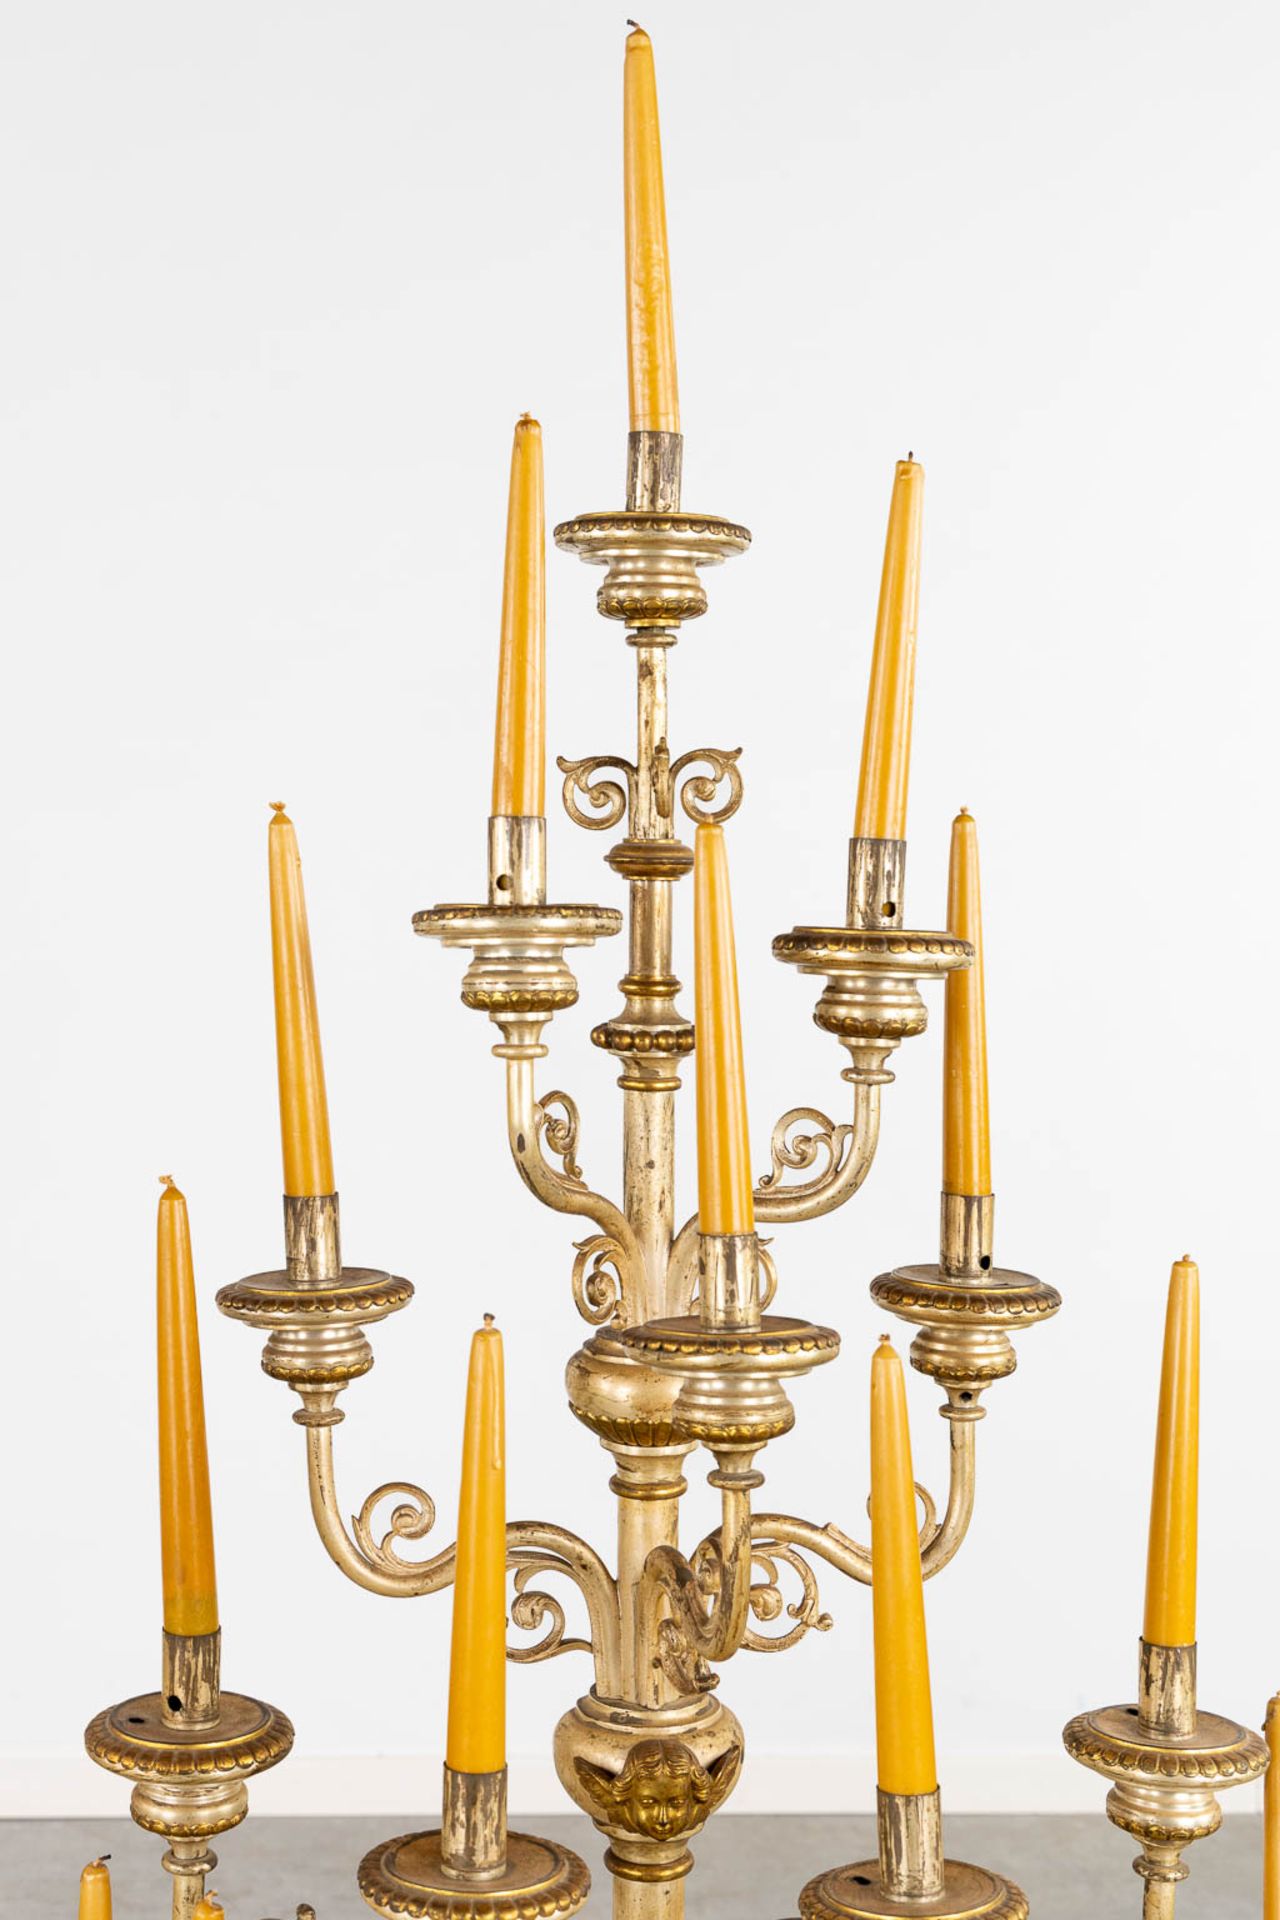 An impressive pair of candelabra, 15 candles, gold and silver-plated metal. (L:44 x W:60 x H:138 cm) - Image 10 of 12